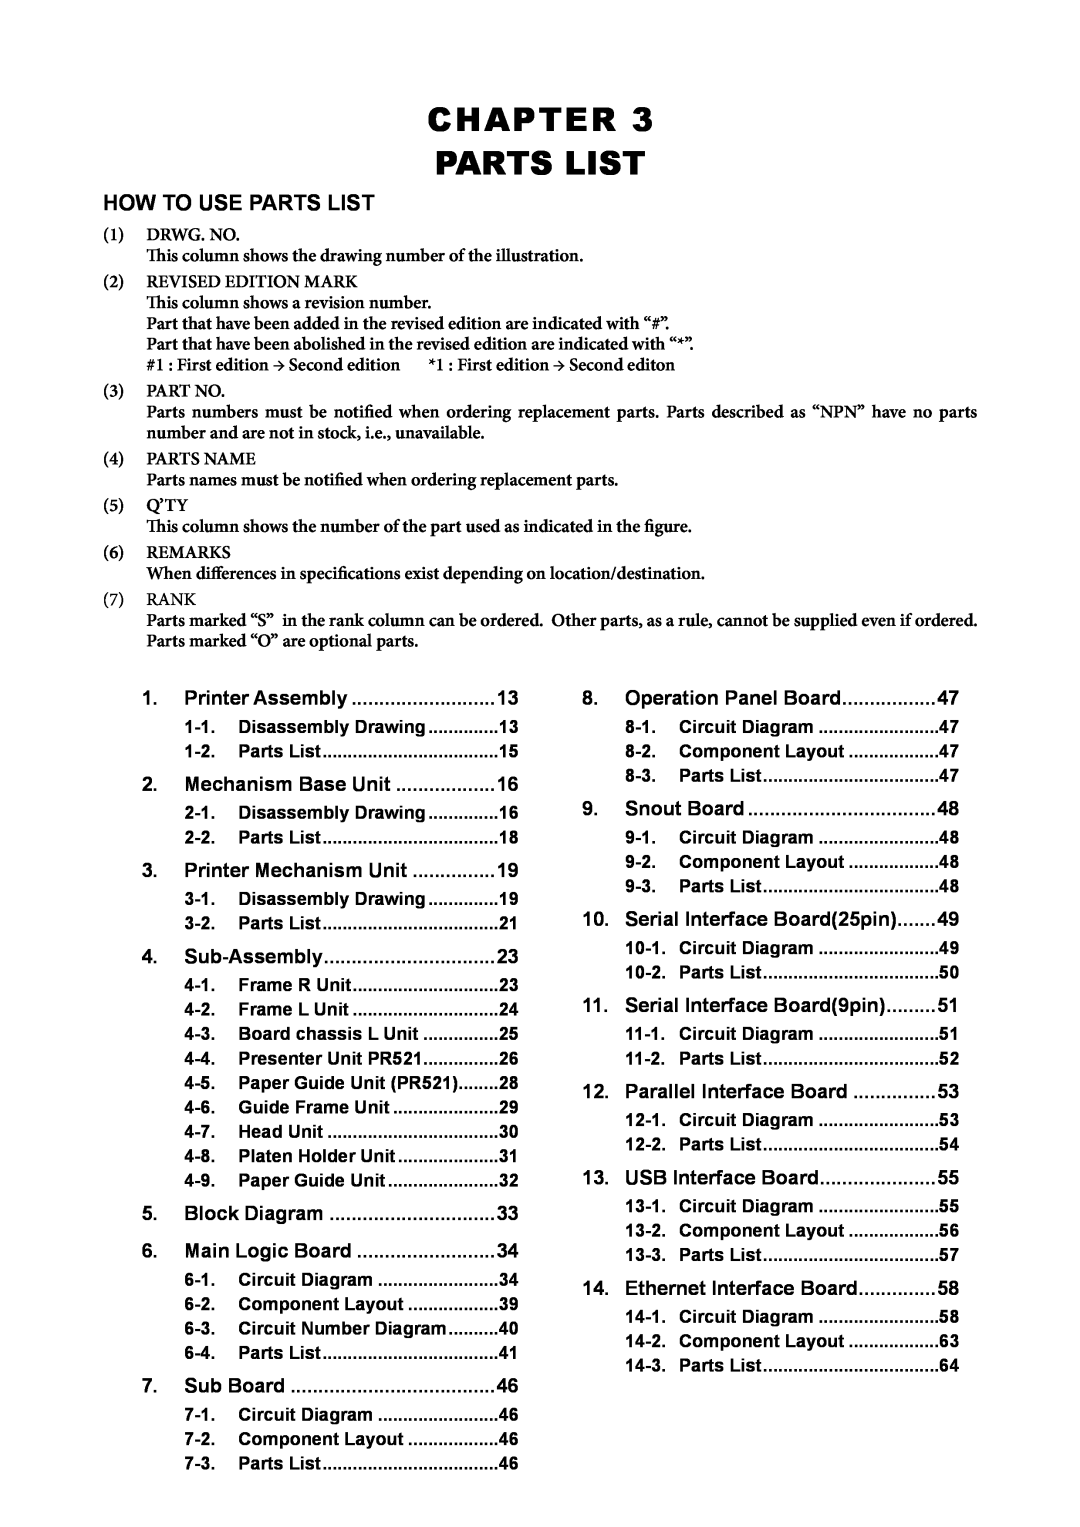 Star Micronics TUP500 technical manual Chapter Parts List, HOw TO USE PARTS LIST 